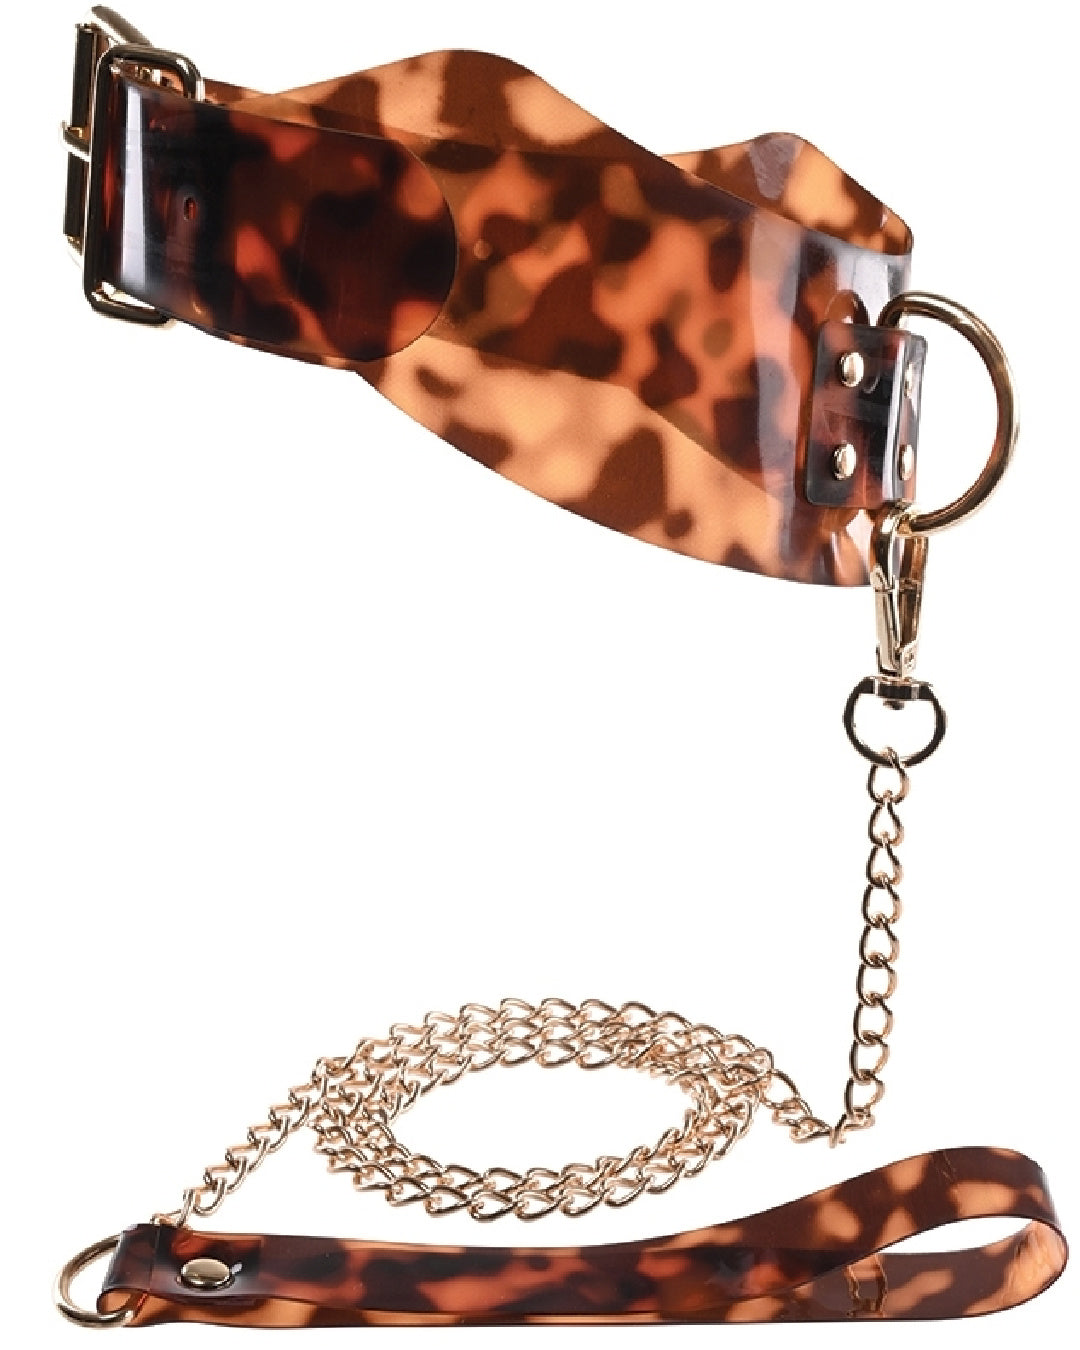 Sincerely Amber Collar and Leash Set on white background 